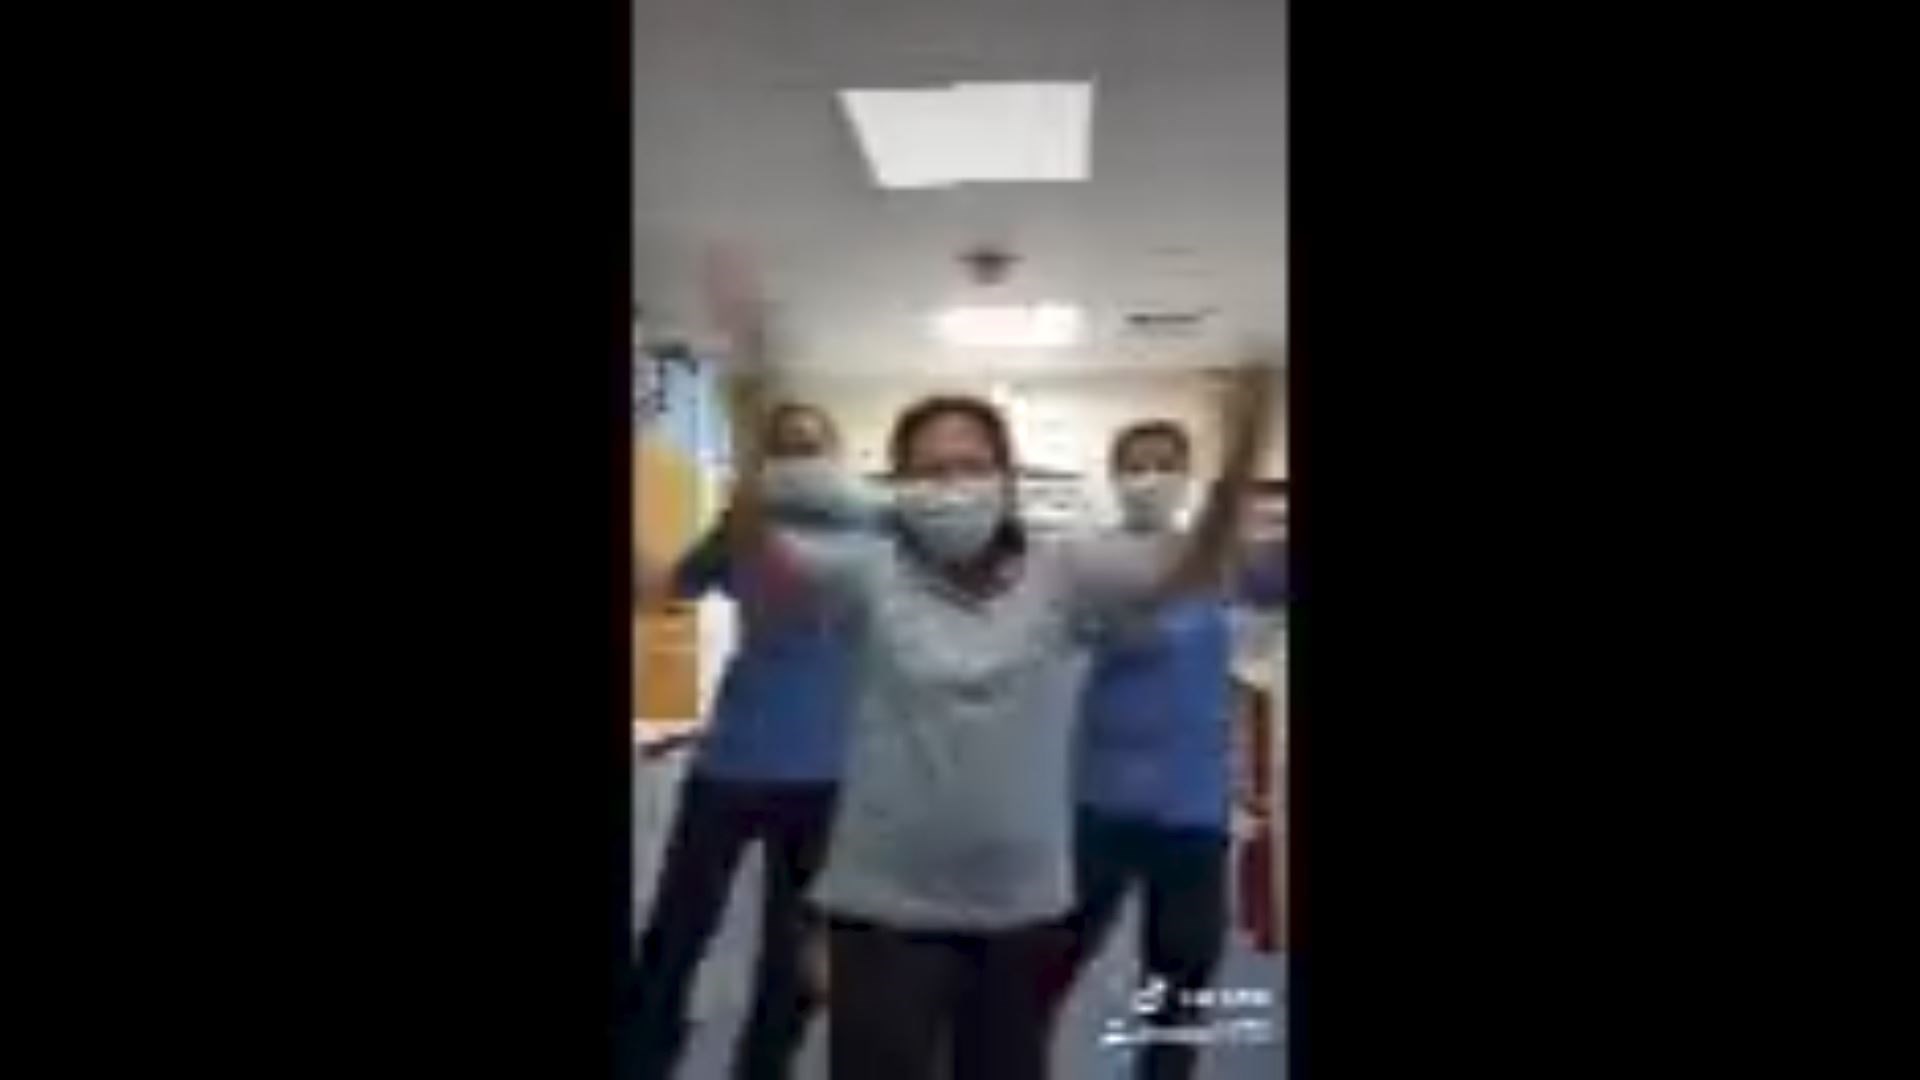 Staff in the renal unit did a dance.